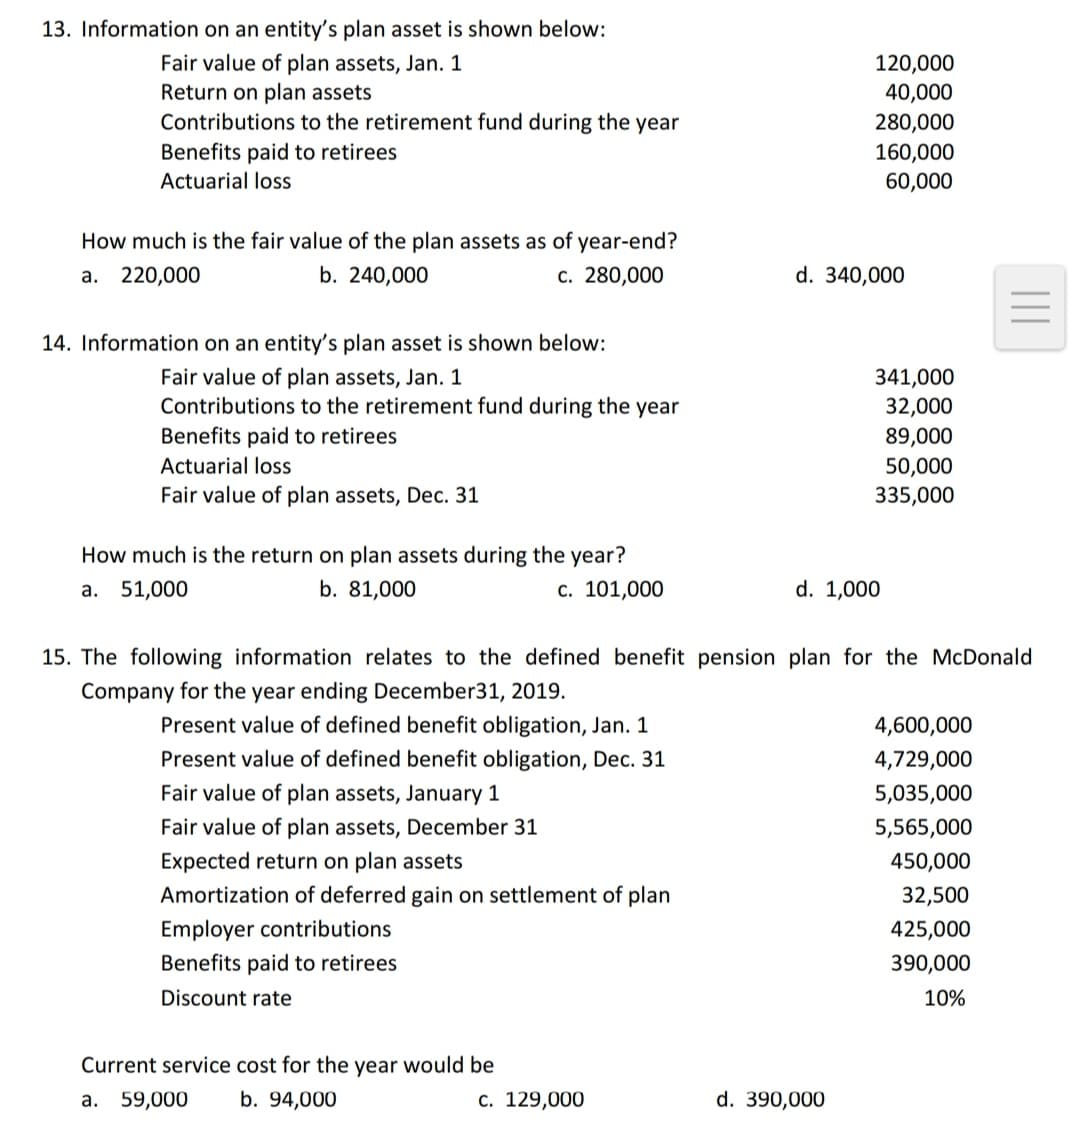 13. Information on an entity's plan asset is shown below:
Fair value of plan assets, Jan. 1
Return on plan assets
Contributions to the retirement fund during the year
Benefits paid to retirees
120,000
40,000
280,000
160,000
Actuarial loss
60,000
How much is the fair value of the plan assets as of year-end?
а. 220,000
b. 240,000
c. 280,000
d. 340,000
14. Information on an entity's plan asset is shown below:
Fair value of plan assets, Jan. 1
Contributions to the retirement fund during the year
Benefits paid to retirees
341,000
32,000
89,000
Actuarial loss
50,000
Fair value of plan assets, Dec. 31
335,000
How much is the return on plan assets during the year?
а. 51,000
b. 81,000
с. 101,000
d. 1,000
15. The following information relates to the defined benefit pension plan for the McDonald
Company for the year ending December31, 2019.
Present value of defined benefit obligation, Jan. 1
4,600,000
Present value of defined benefit obligation, Dec. 31
Fair value of plan assets, January 1
4,729,000
5,035,000
Fair value of plan assets, December 31
5,565,000
Expected return on plan assets
450,000
Amortization of deferred gain on settlement of plan
32,500
Employer contributions
425,000
Benefits paid to retirees
390,000
Discount rate
10%
Current service cost for the year would be
а. 59,000
b. 94,000
c. 129,000
d. 390,000
